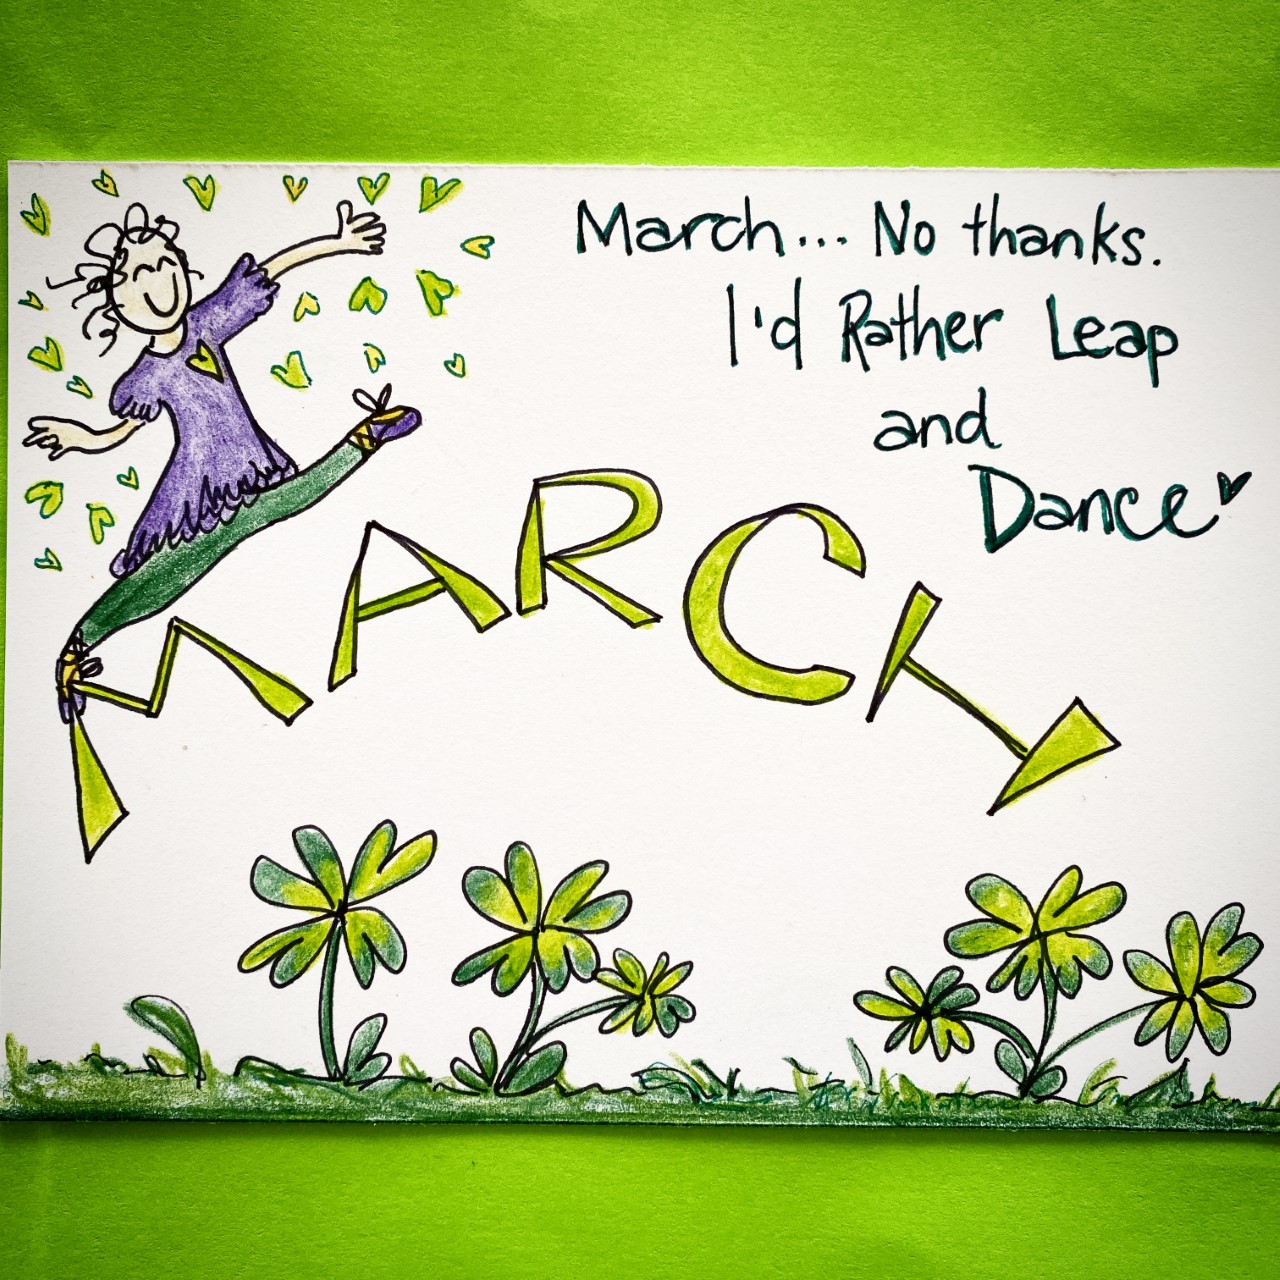 Leap into March with Rosie's Heart